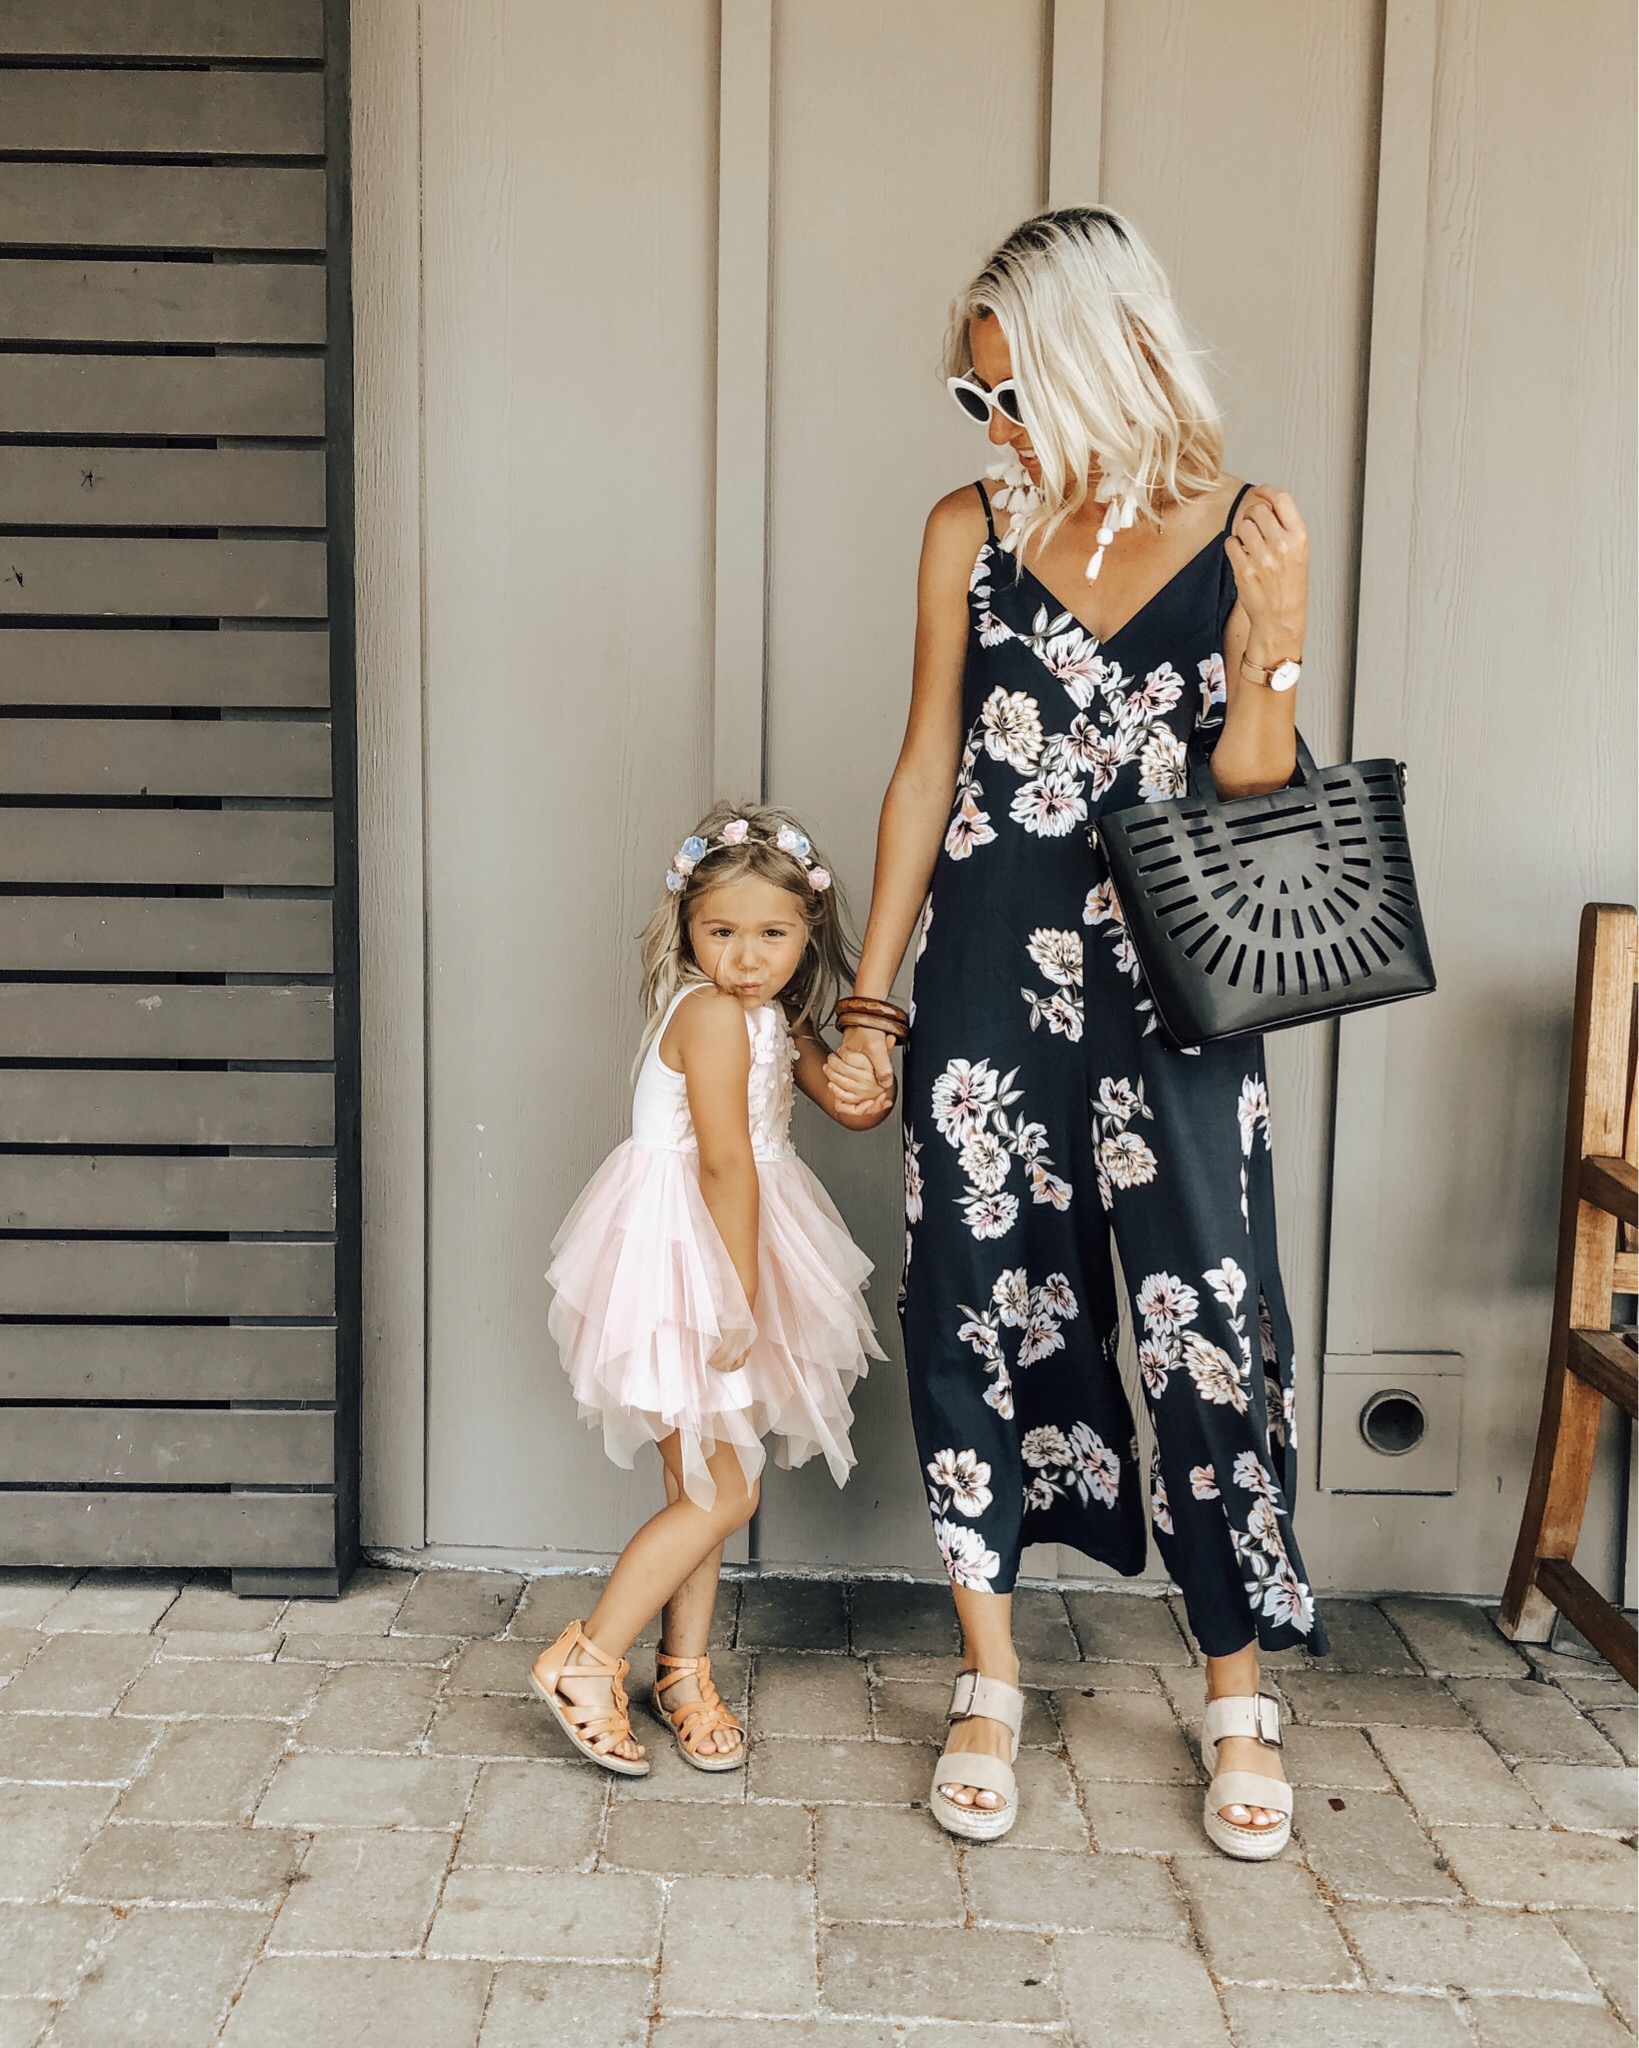 APRIL TOP 10- Jaclyn De Leon Style + Here you have my top selling items for the entire month of April. No surprise the coziest jumpsuit and the cutest espadrilles I can't stop wearing come in at the top